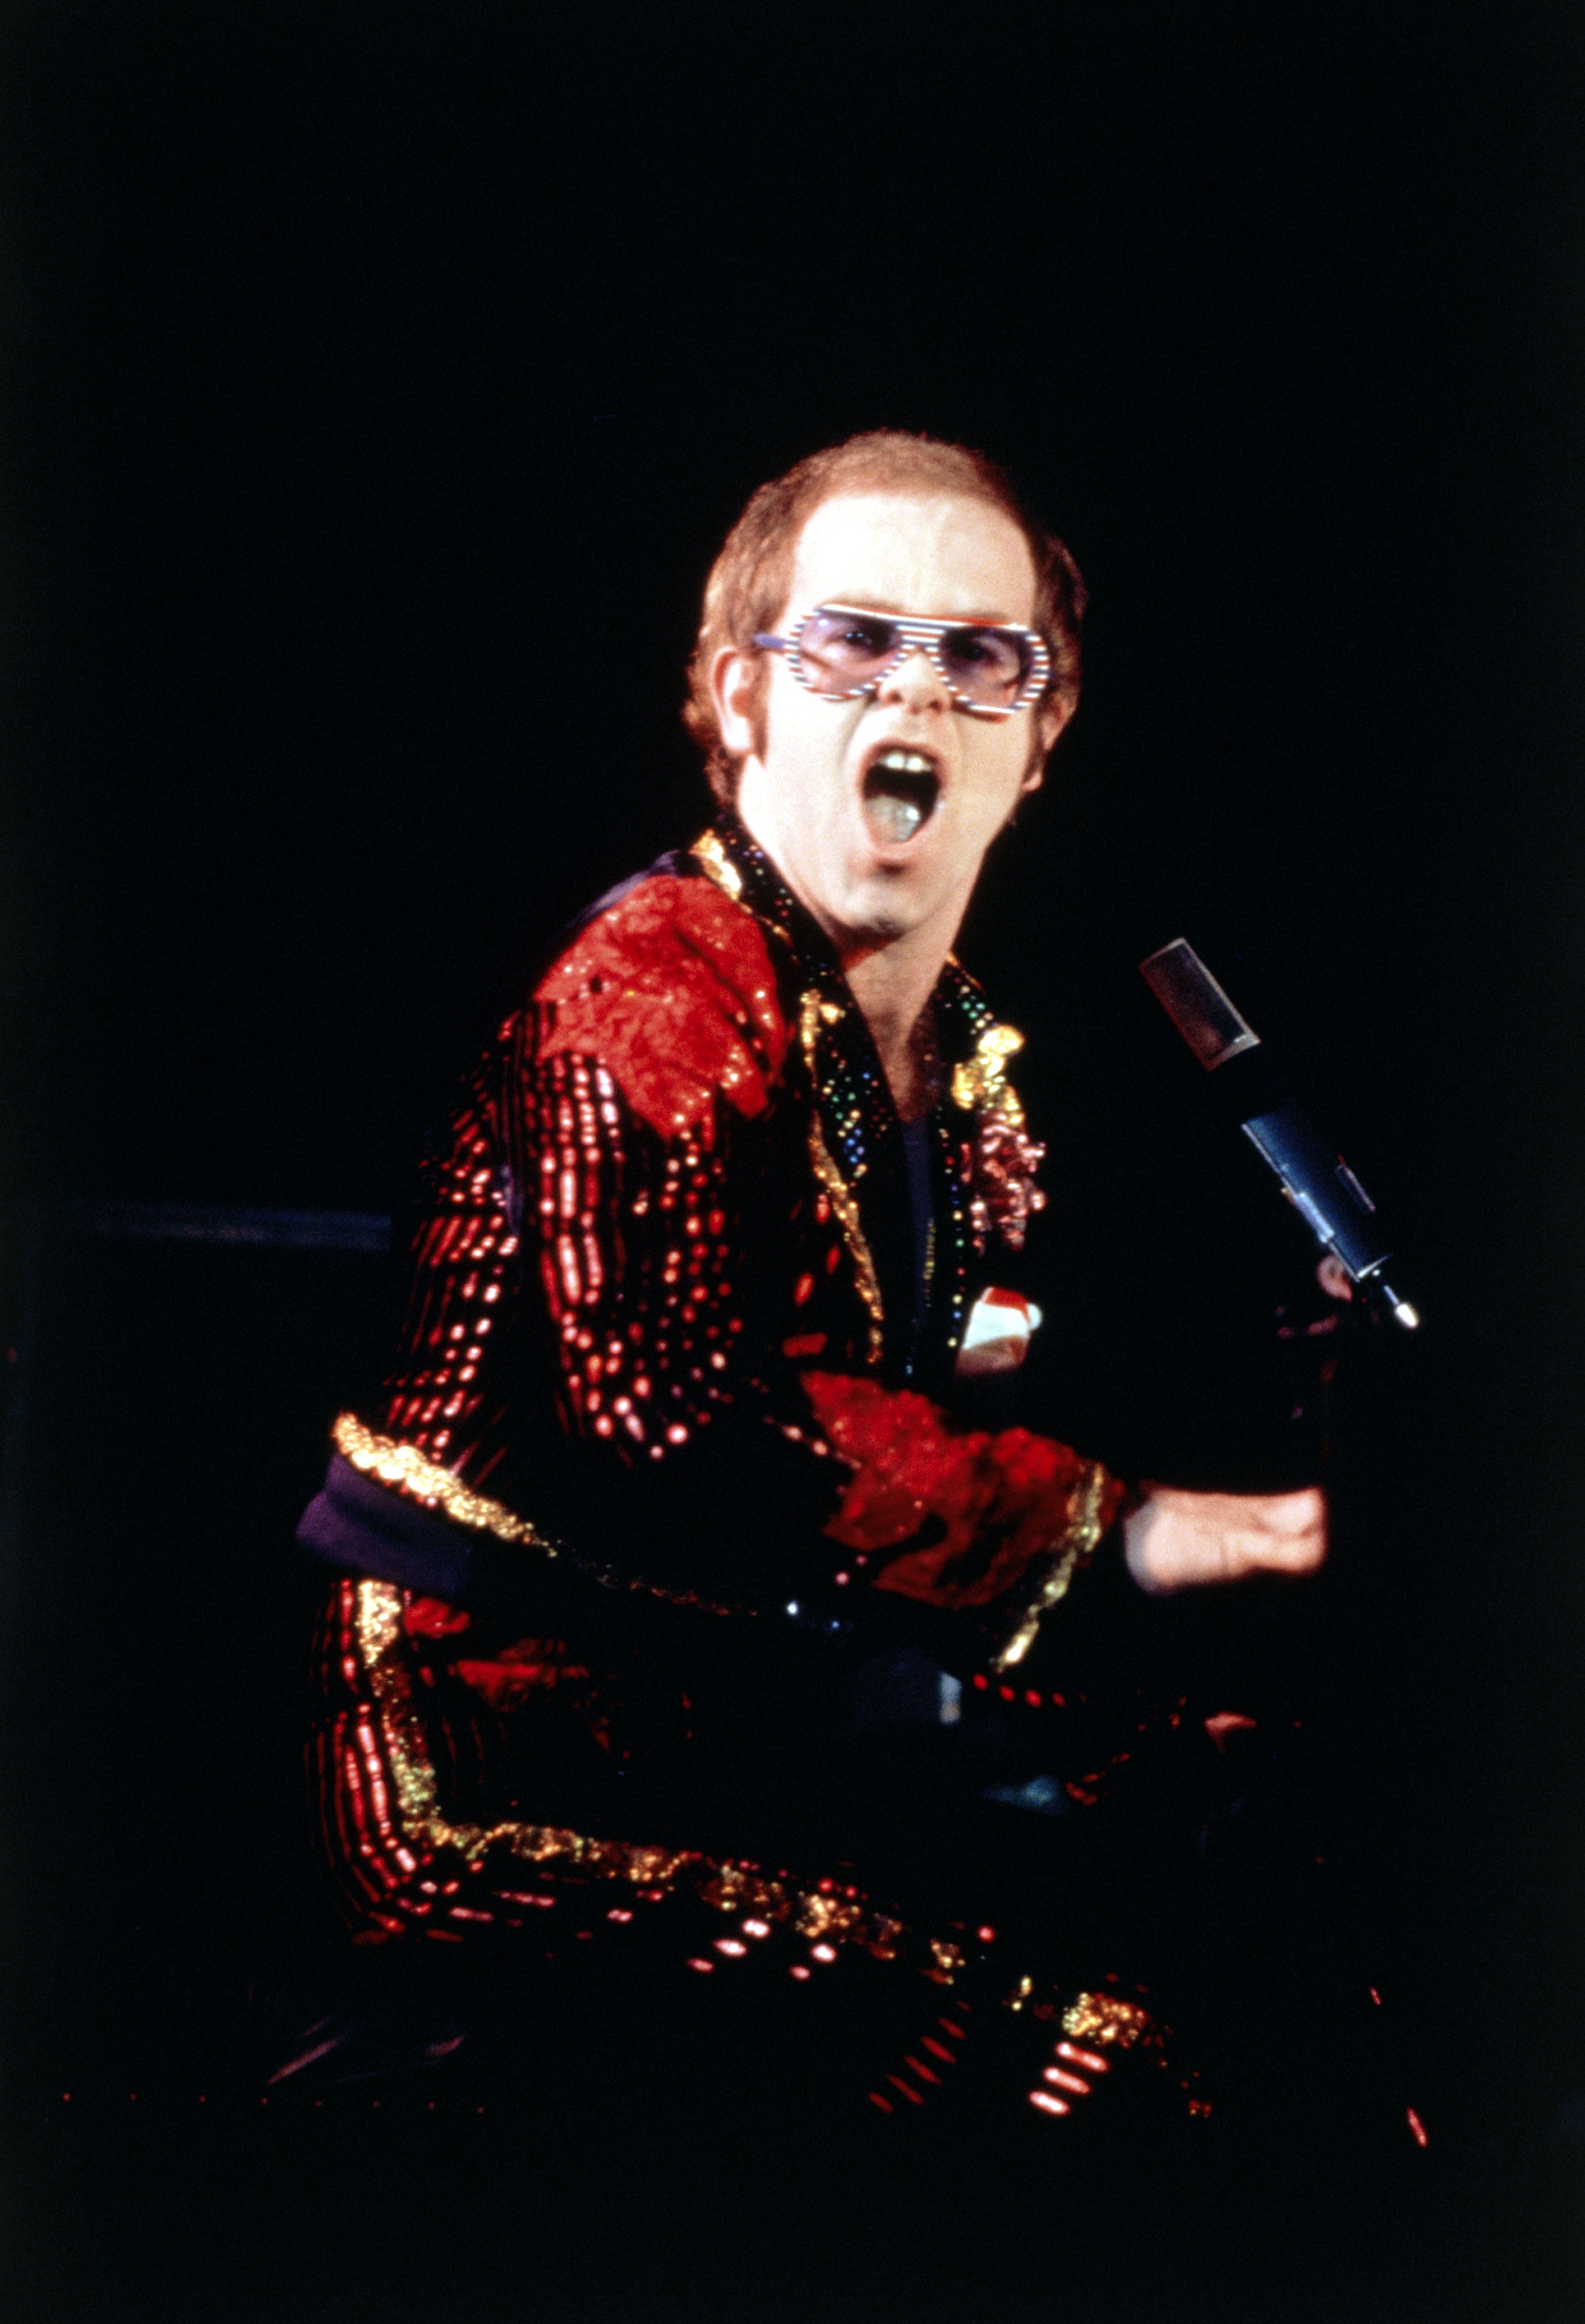 Elton John's Country Songs: A List of 15 of the Best | Holler